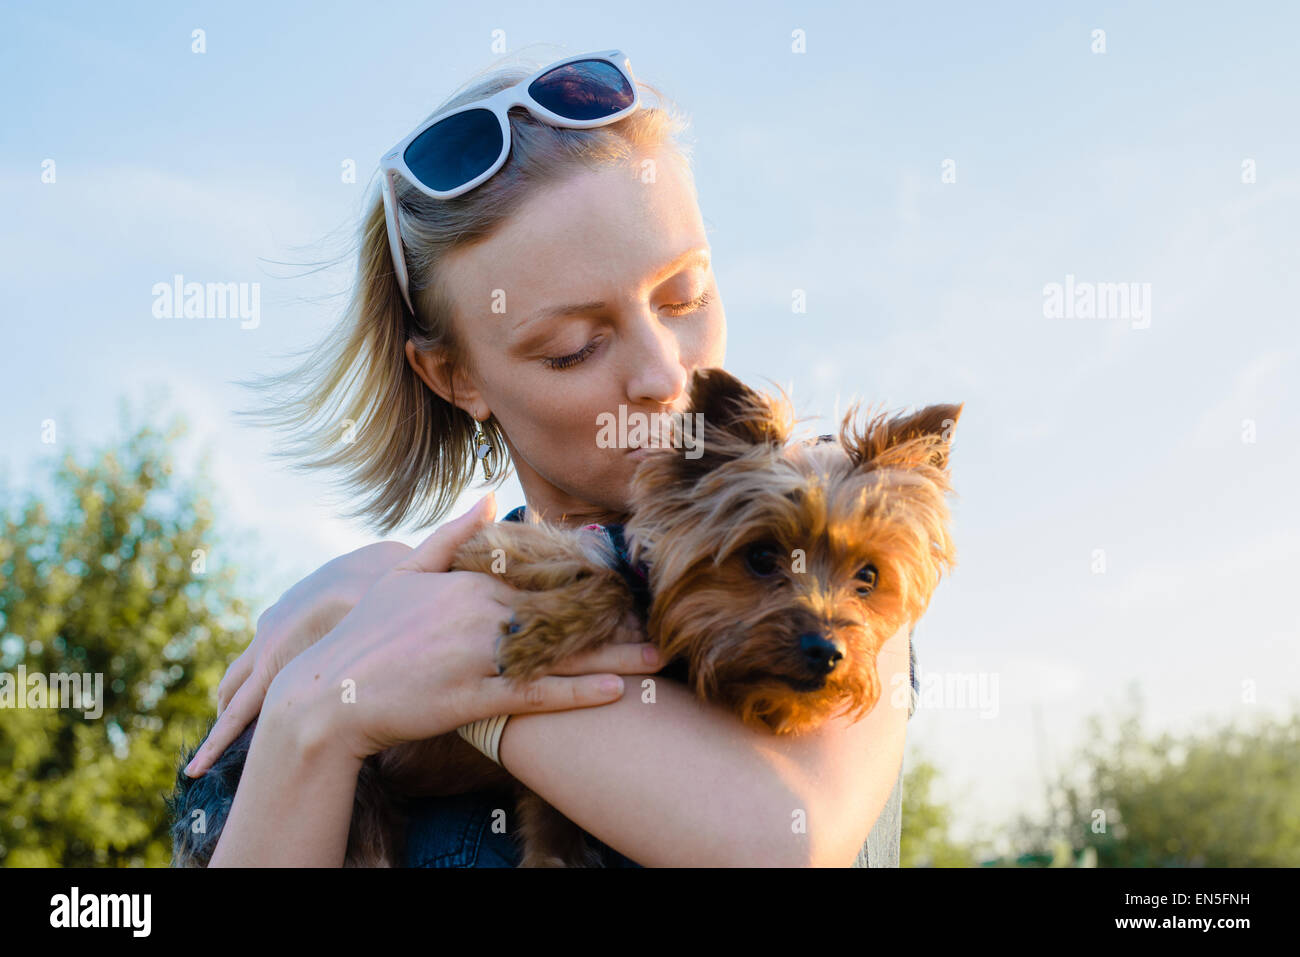 Beautiful Young Happy Woman With Blonde Hair Kissing Small Dog